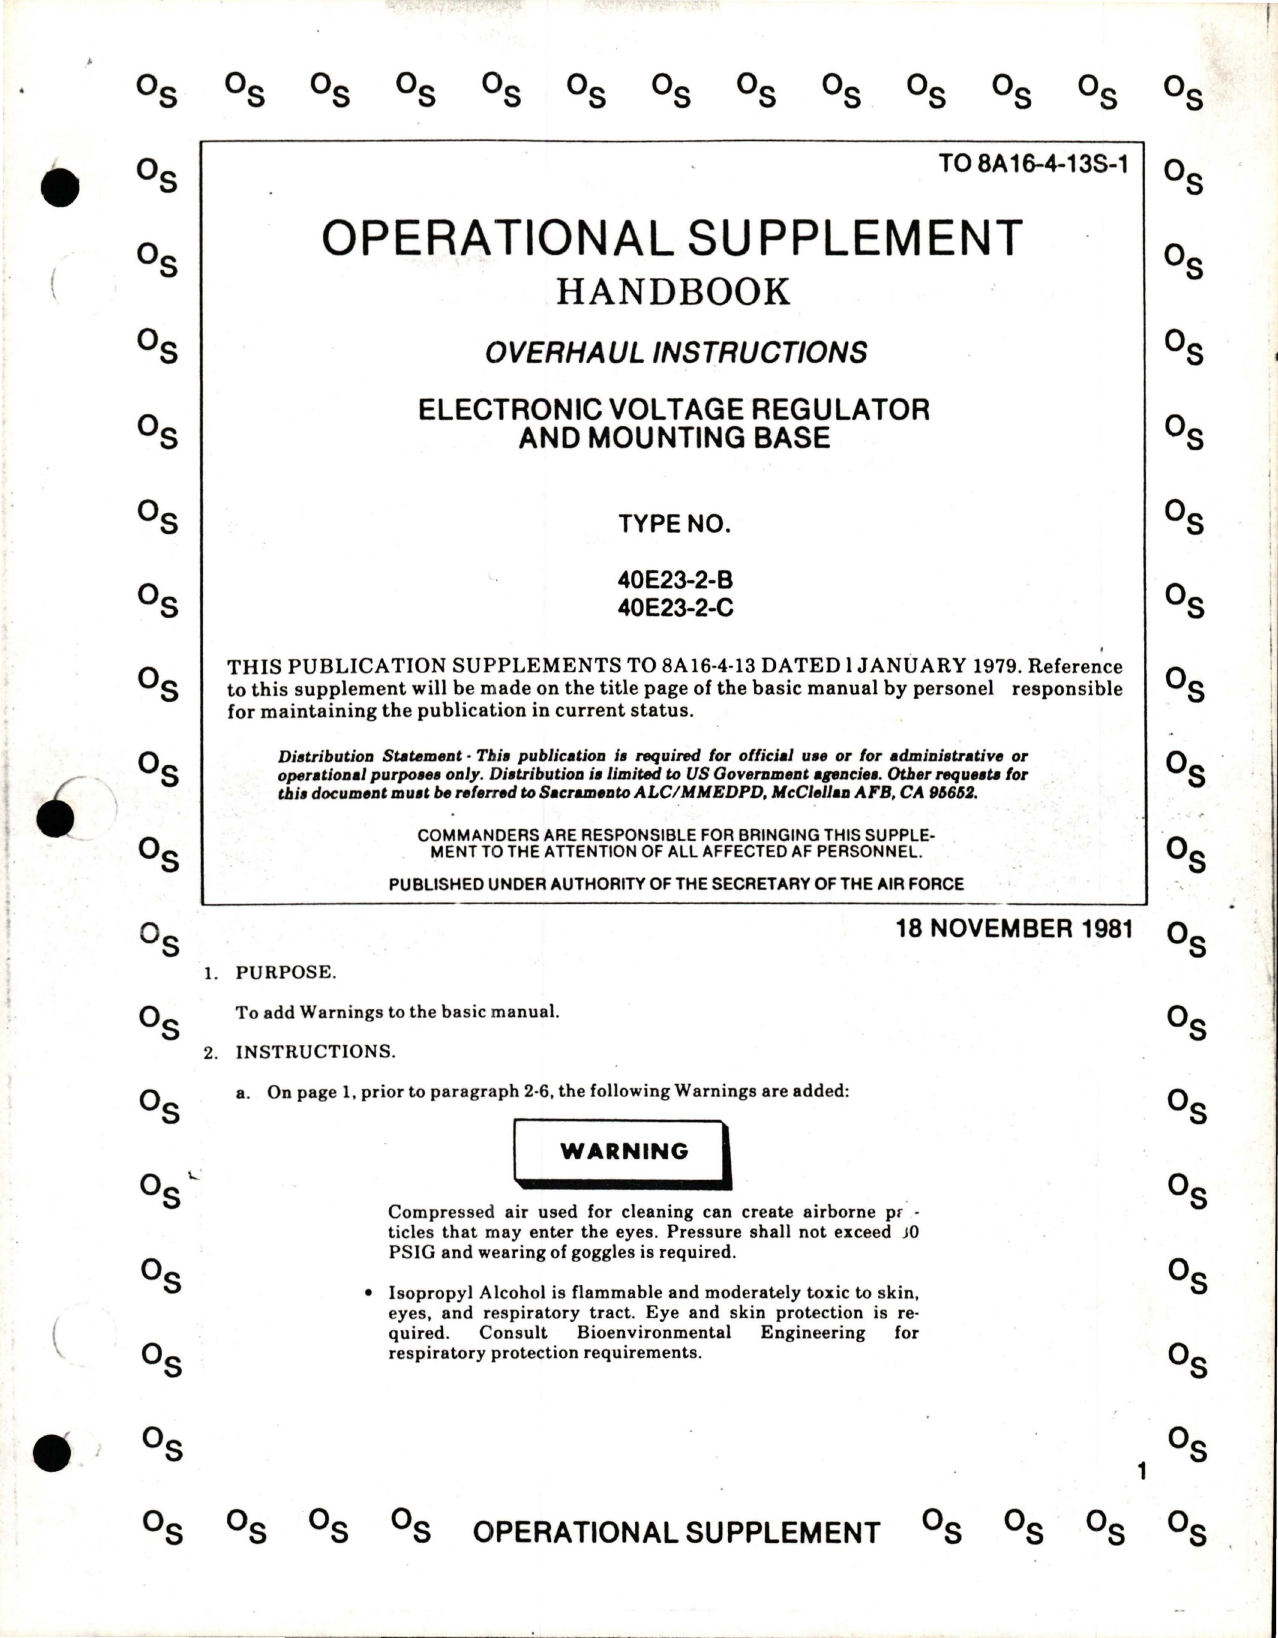 Sample page 1 from AirCorps Library document: Supplement to Overhaul Instructions for Electronic Voltage Regulator and Mounting Base - Type 40E23-2-B and 40E23-2-C 